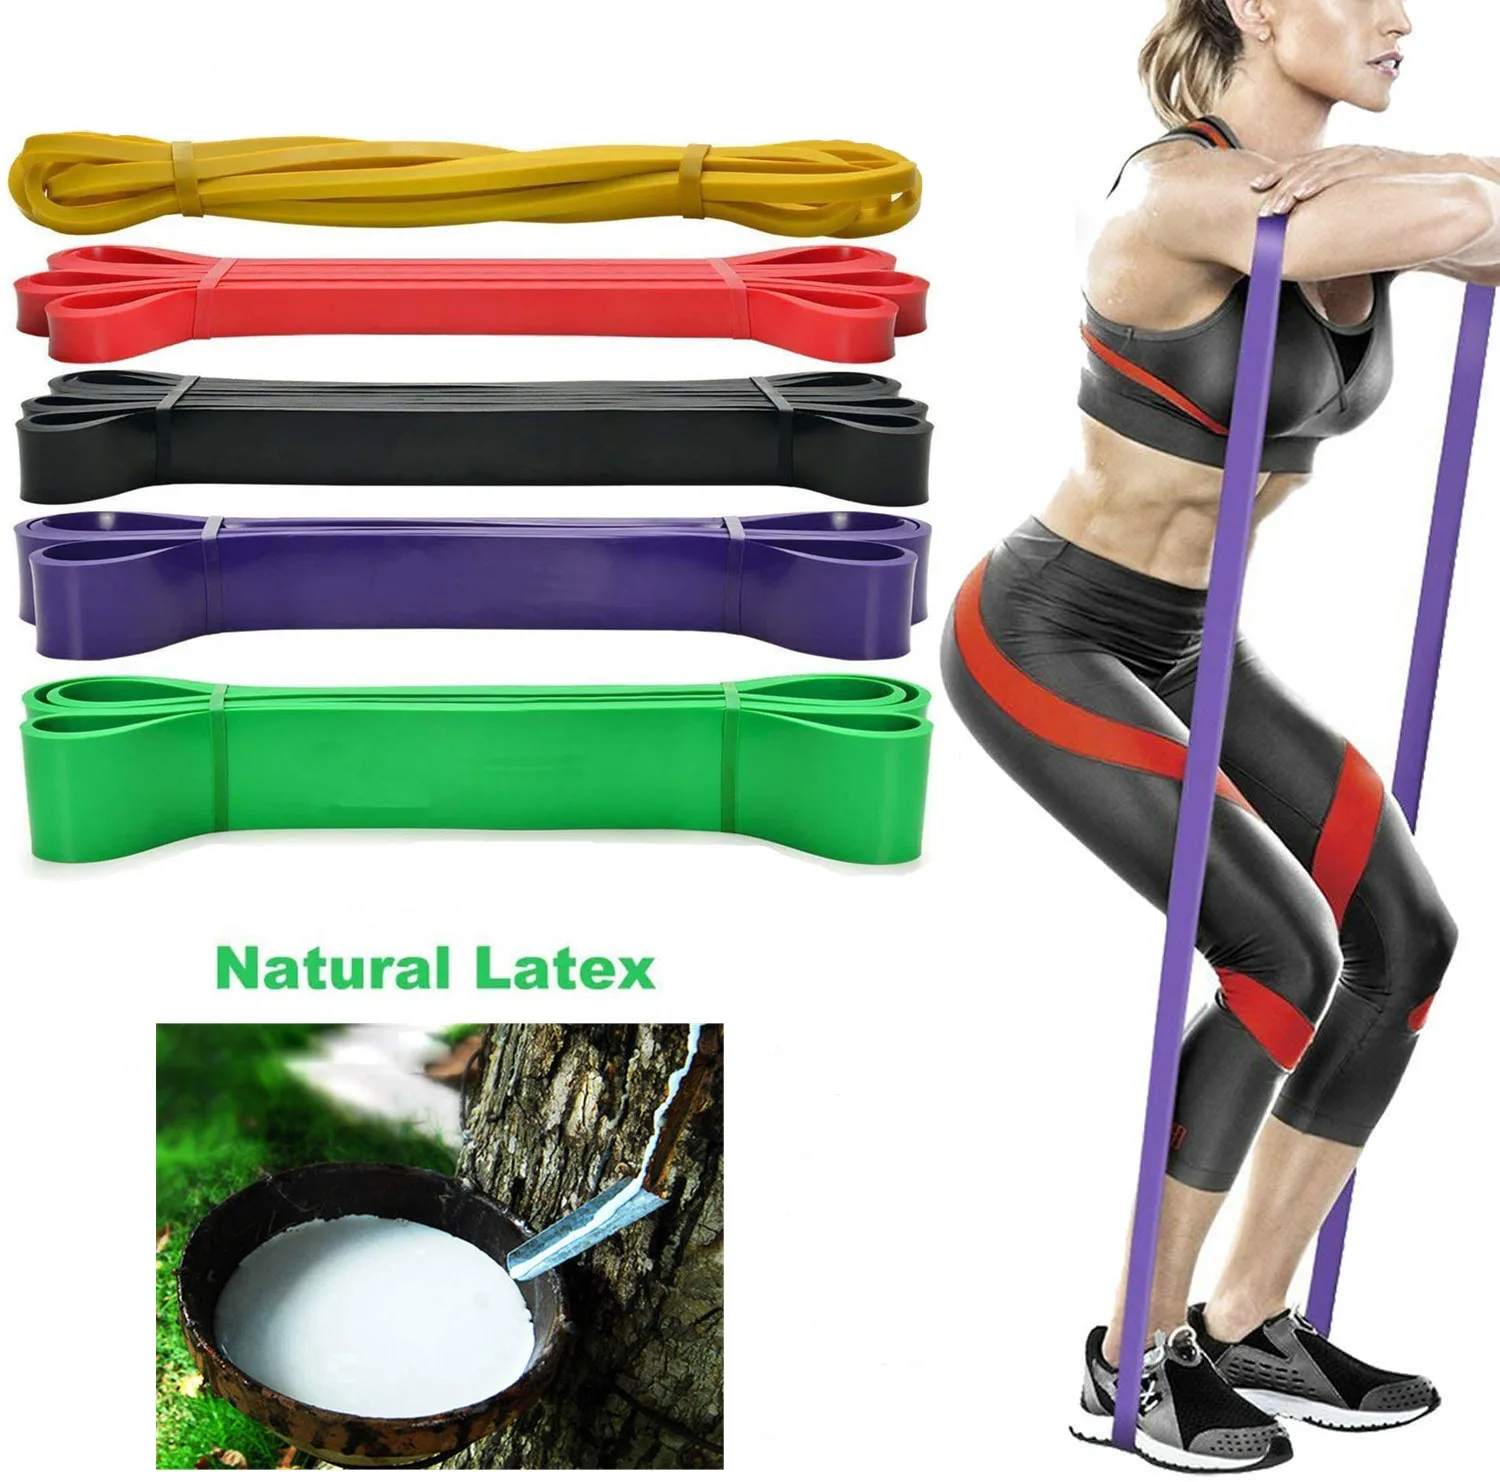 Pull Up Assist Bands Latex Resistance Streching Band Workout Fitness Equipment 